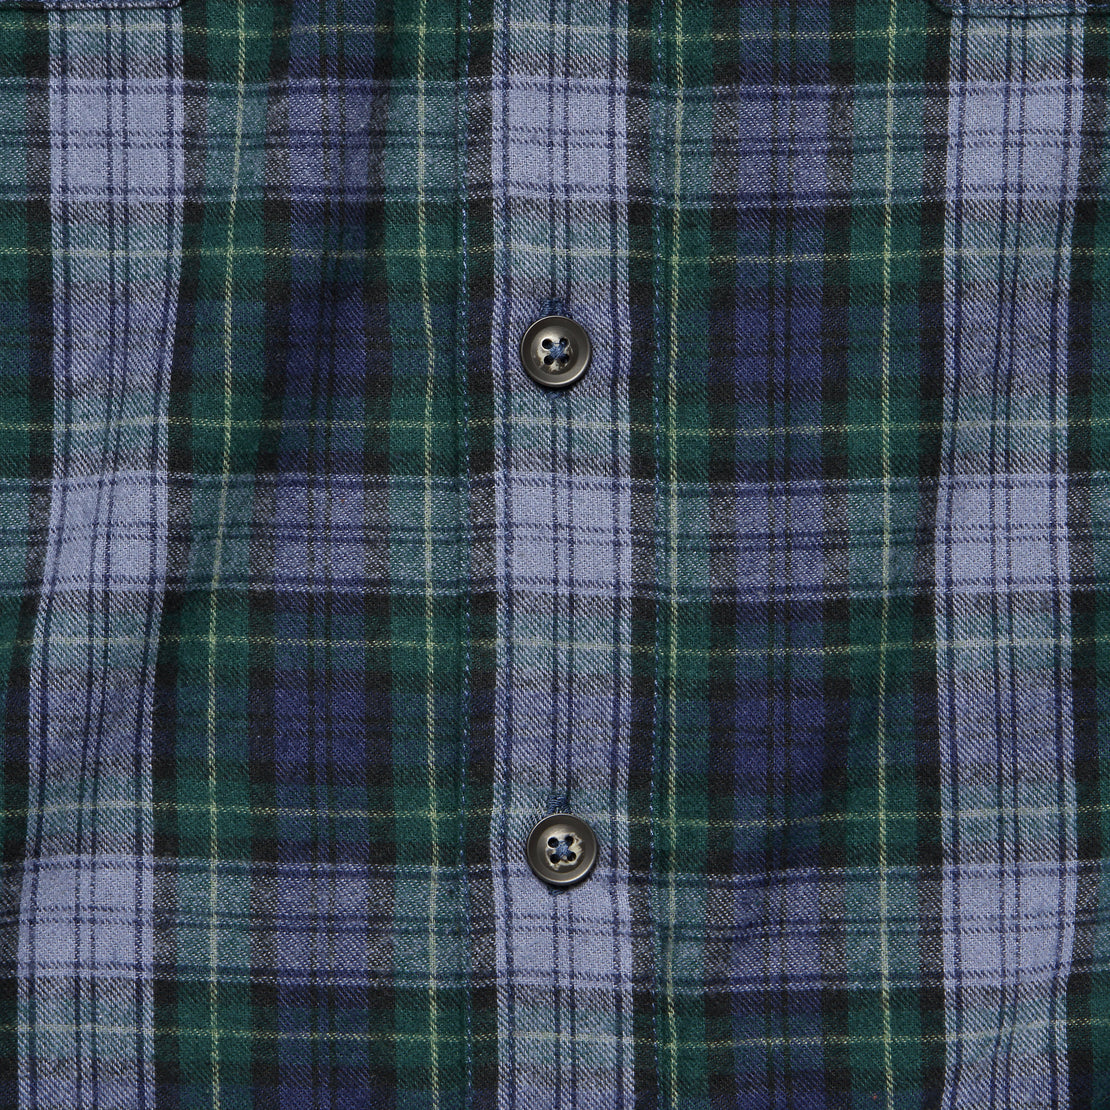 Rexford Mid-weight Plaid Shirt - Green/Blue - Grayers - STAG Provisions - Tops - L/S Woven - Plaid